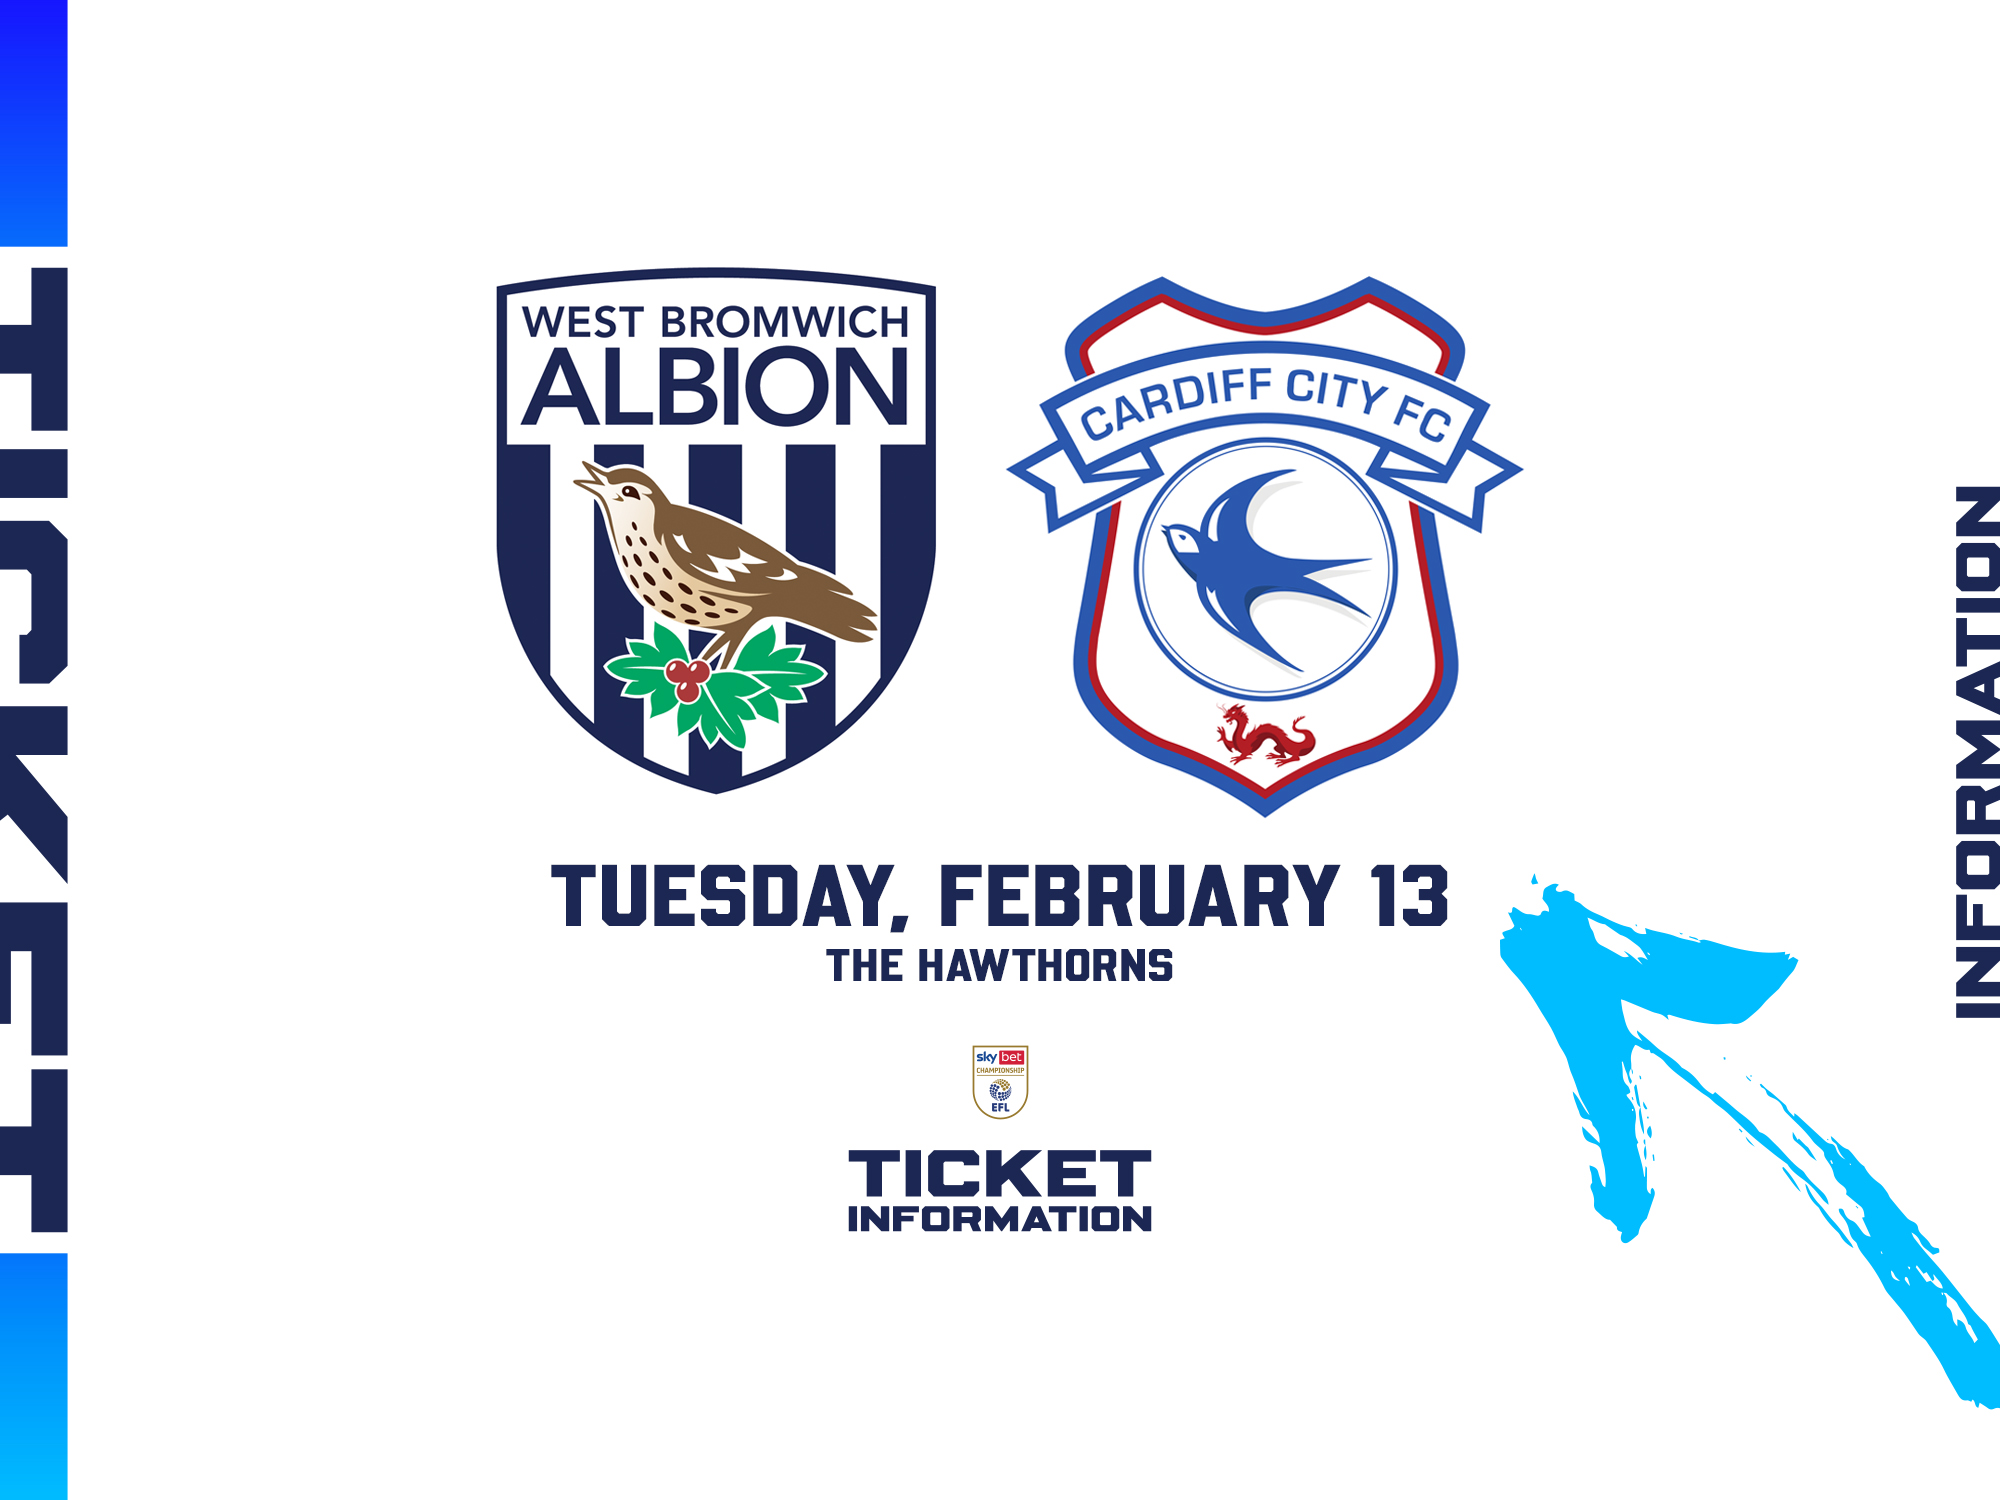 A ticket graphic displaying information for Albion's game against Cardiff